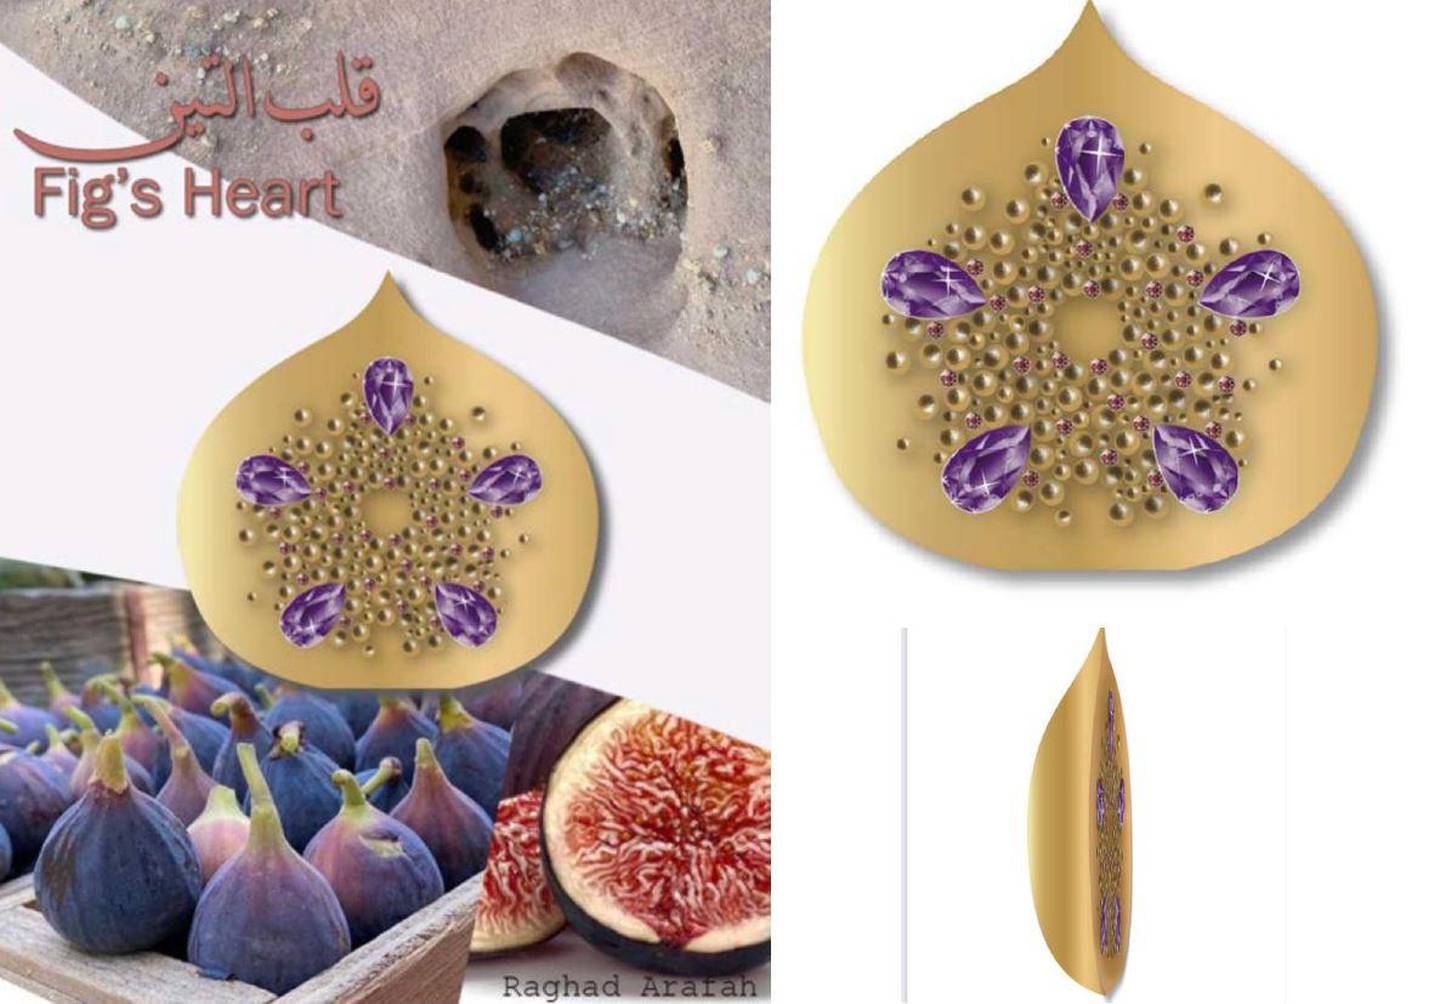 The design by third place winner  Raghad Ayman Arafah combined gems and precious metal in a design based on the fig. Courtesy Piaget